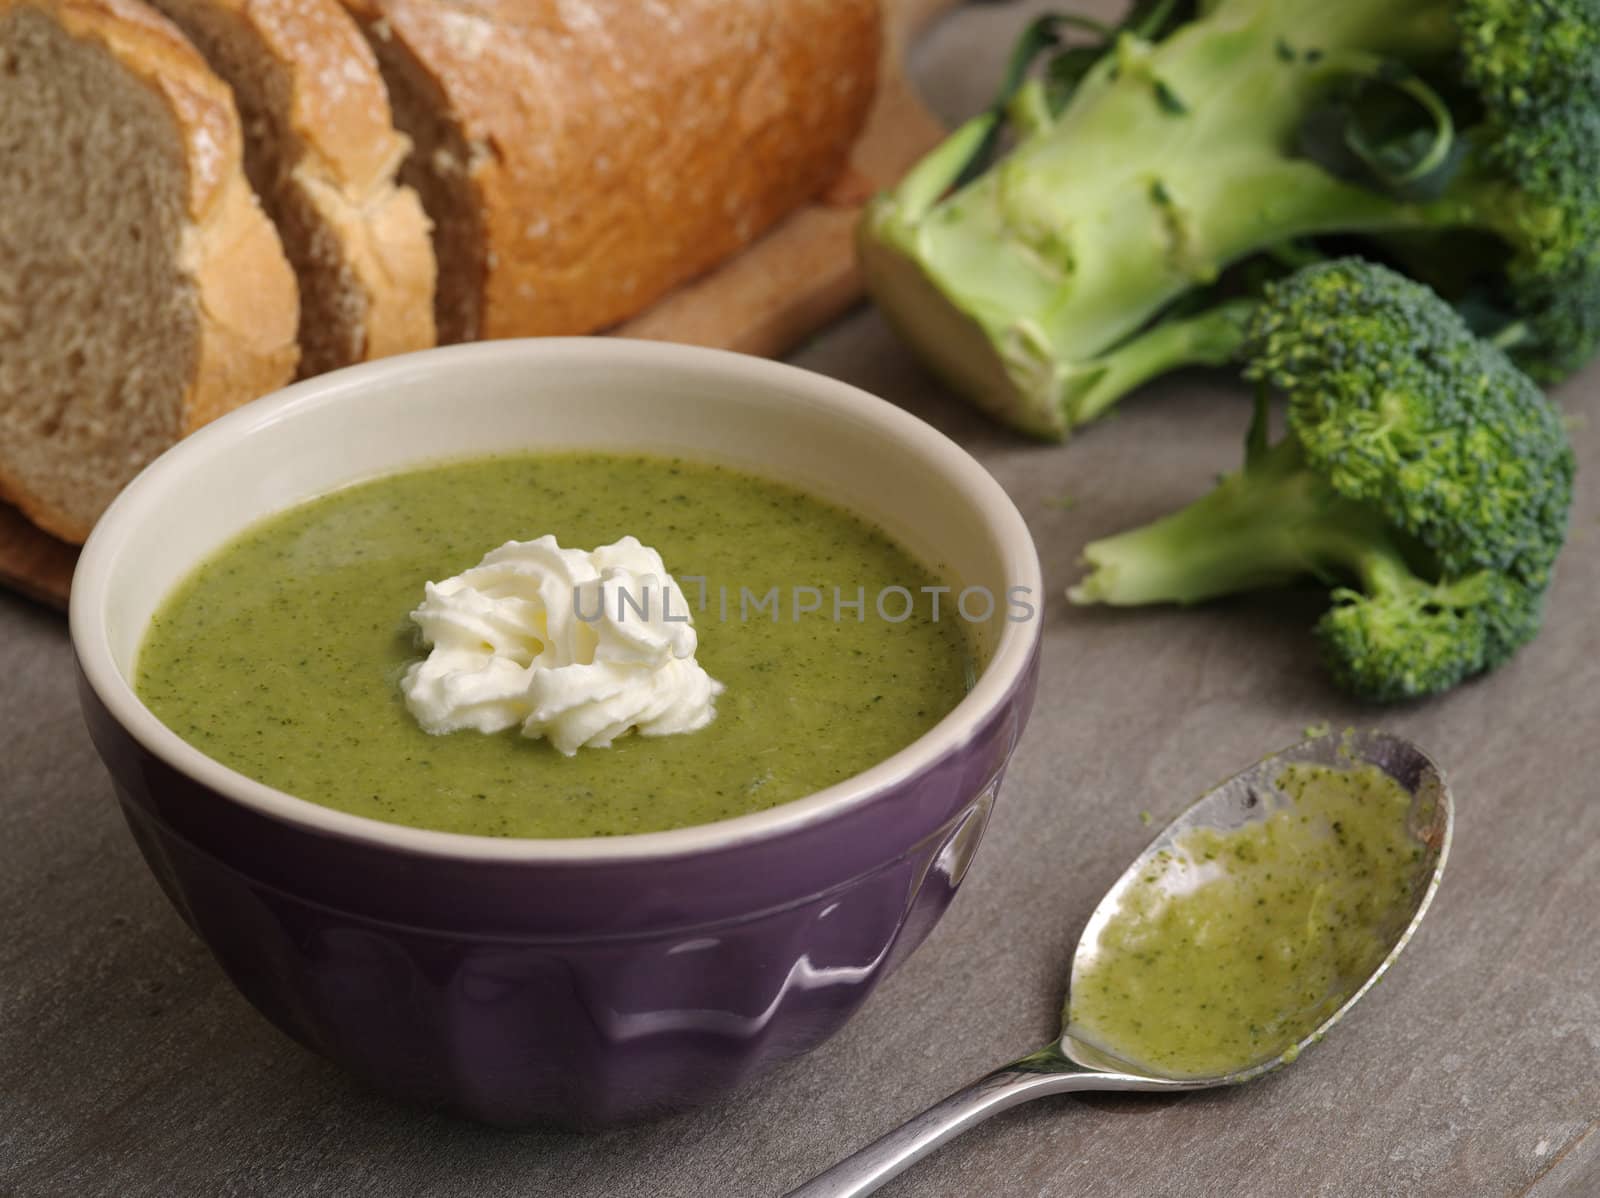 Photo of broccoli soup with a loaf of bread in the background.
